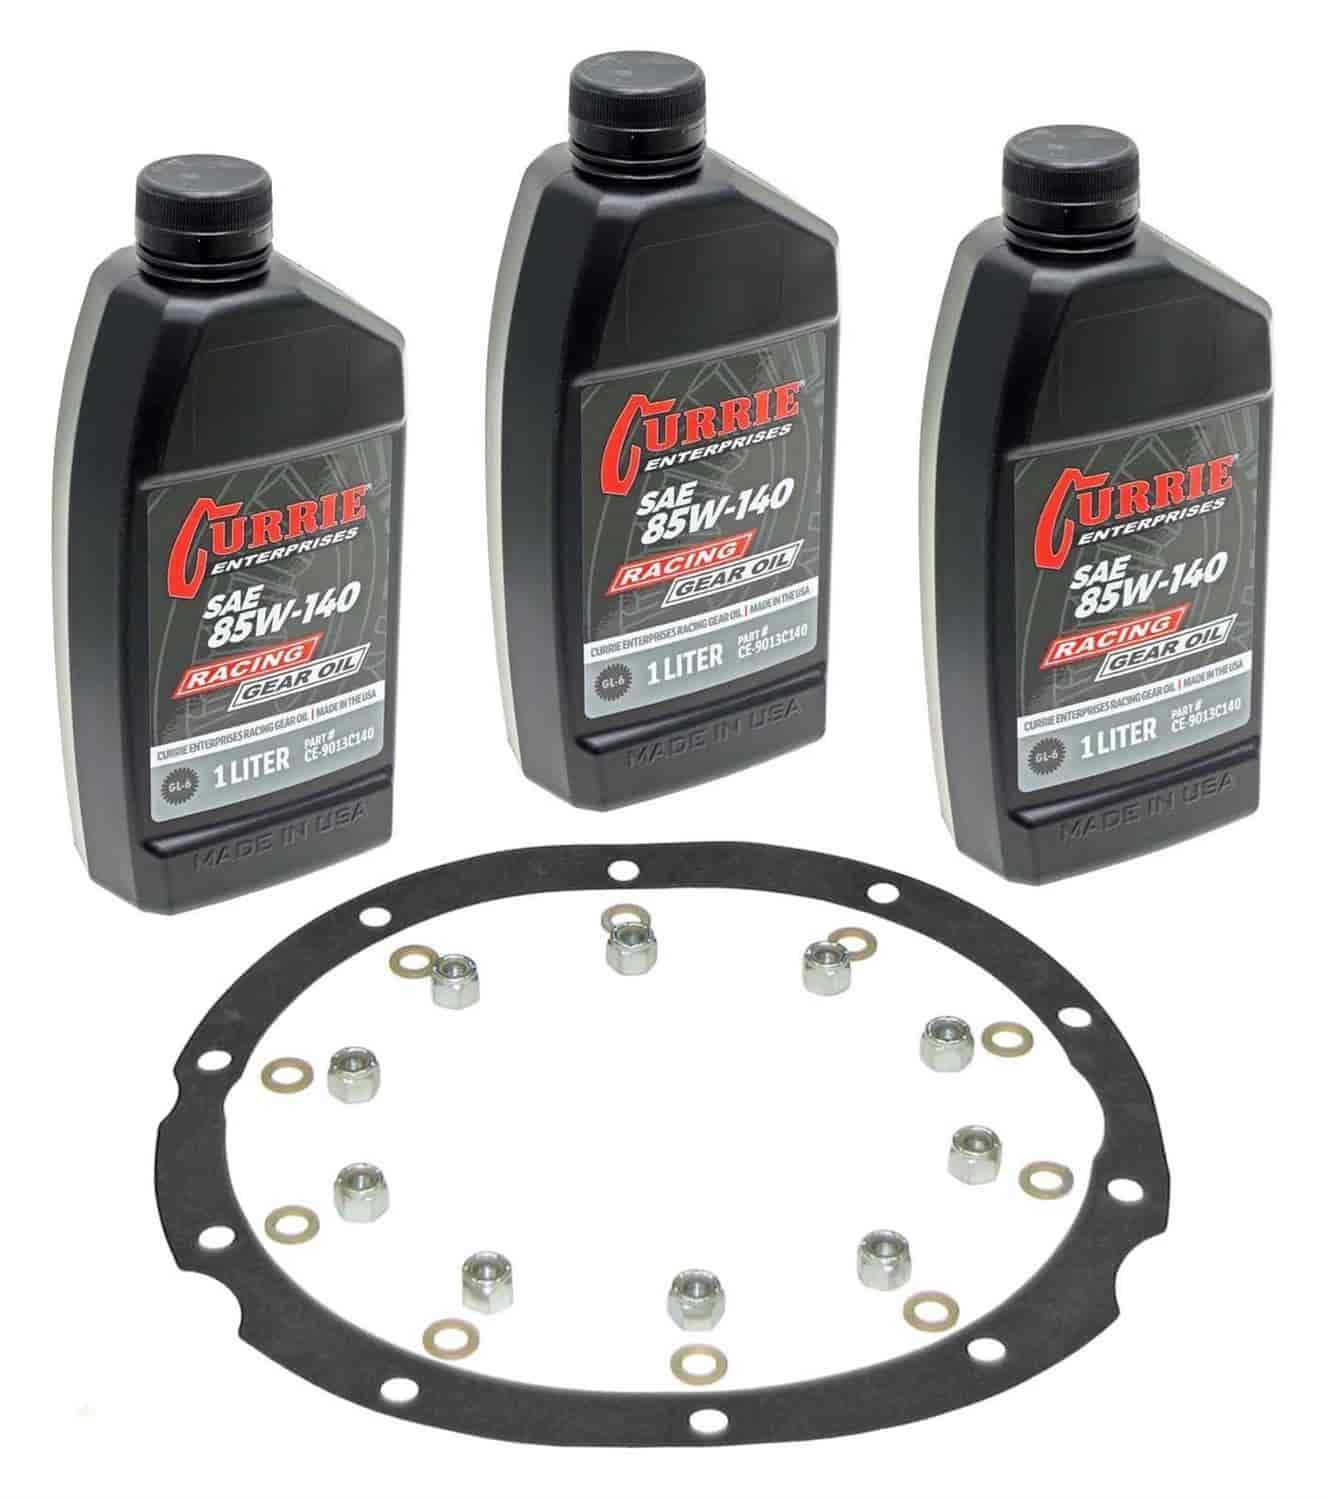 Installation Kit 9" Ford 3rd Member Includes: